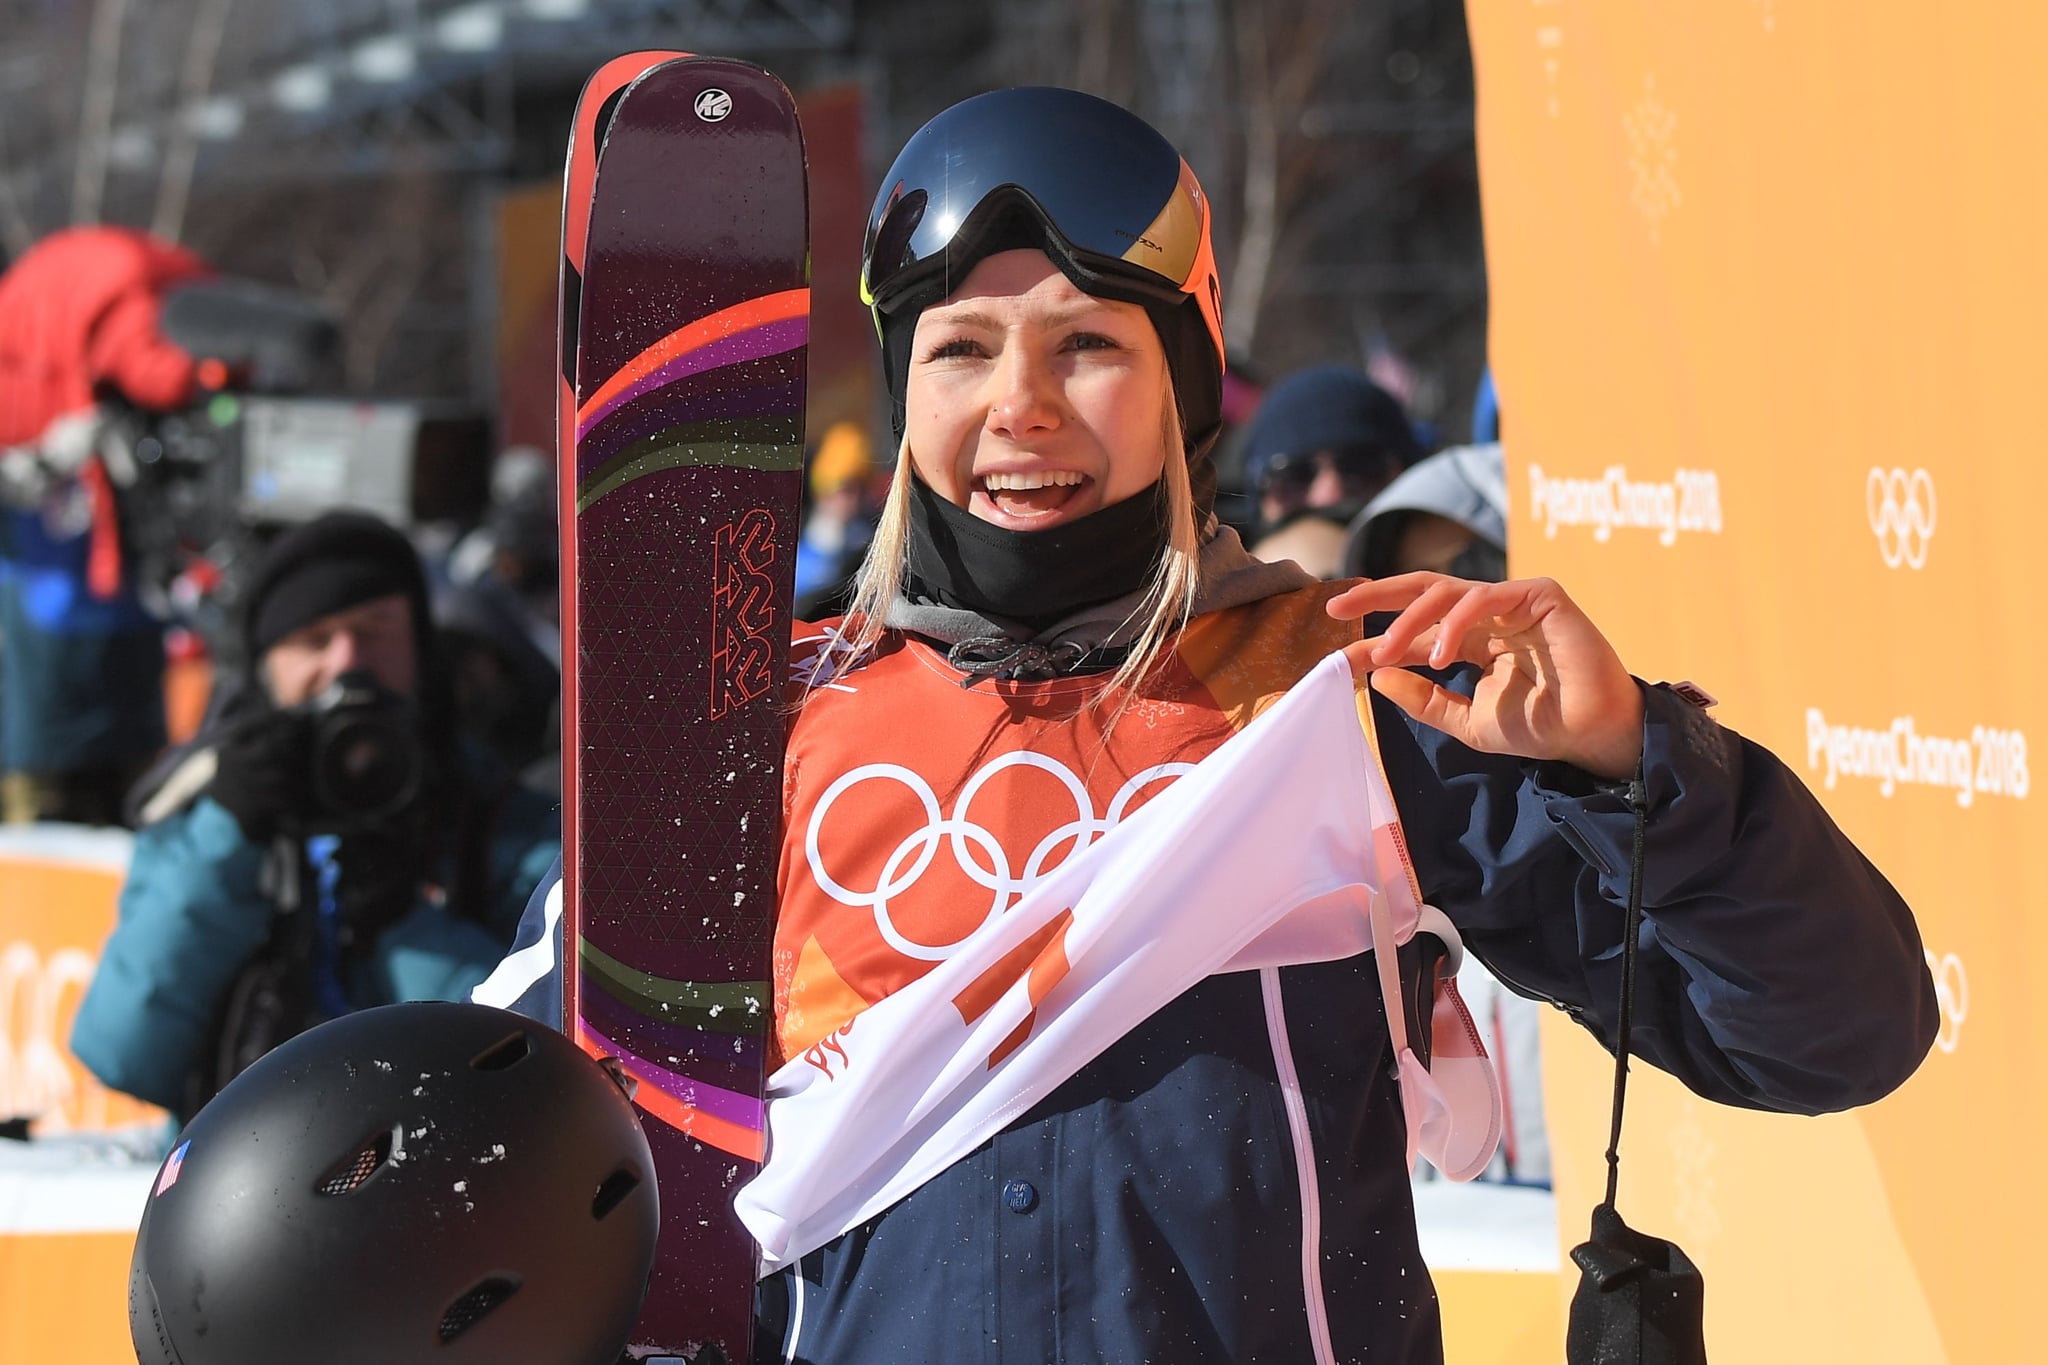 US Maggie Voisin reacts after competing in a run of the women's ski slopestyle final event during the Pyeongchang 2018 Winter Olympic Games at the Phoenix Park in Pyeongchang on February 17, 2018. / AFP PHOTO / LOIC VENANCE        (Photo credit should read LOIC VENANCE/AFP via Getty Images)